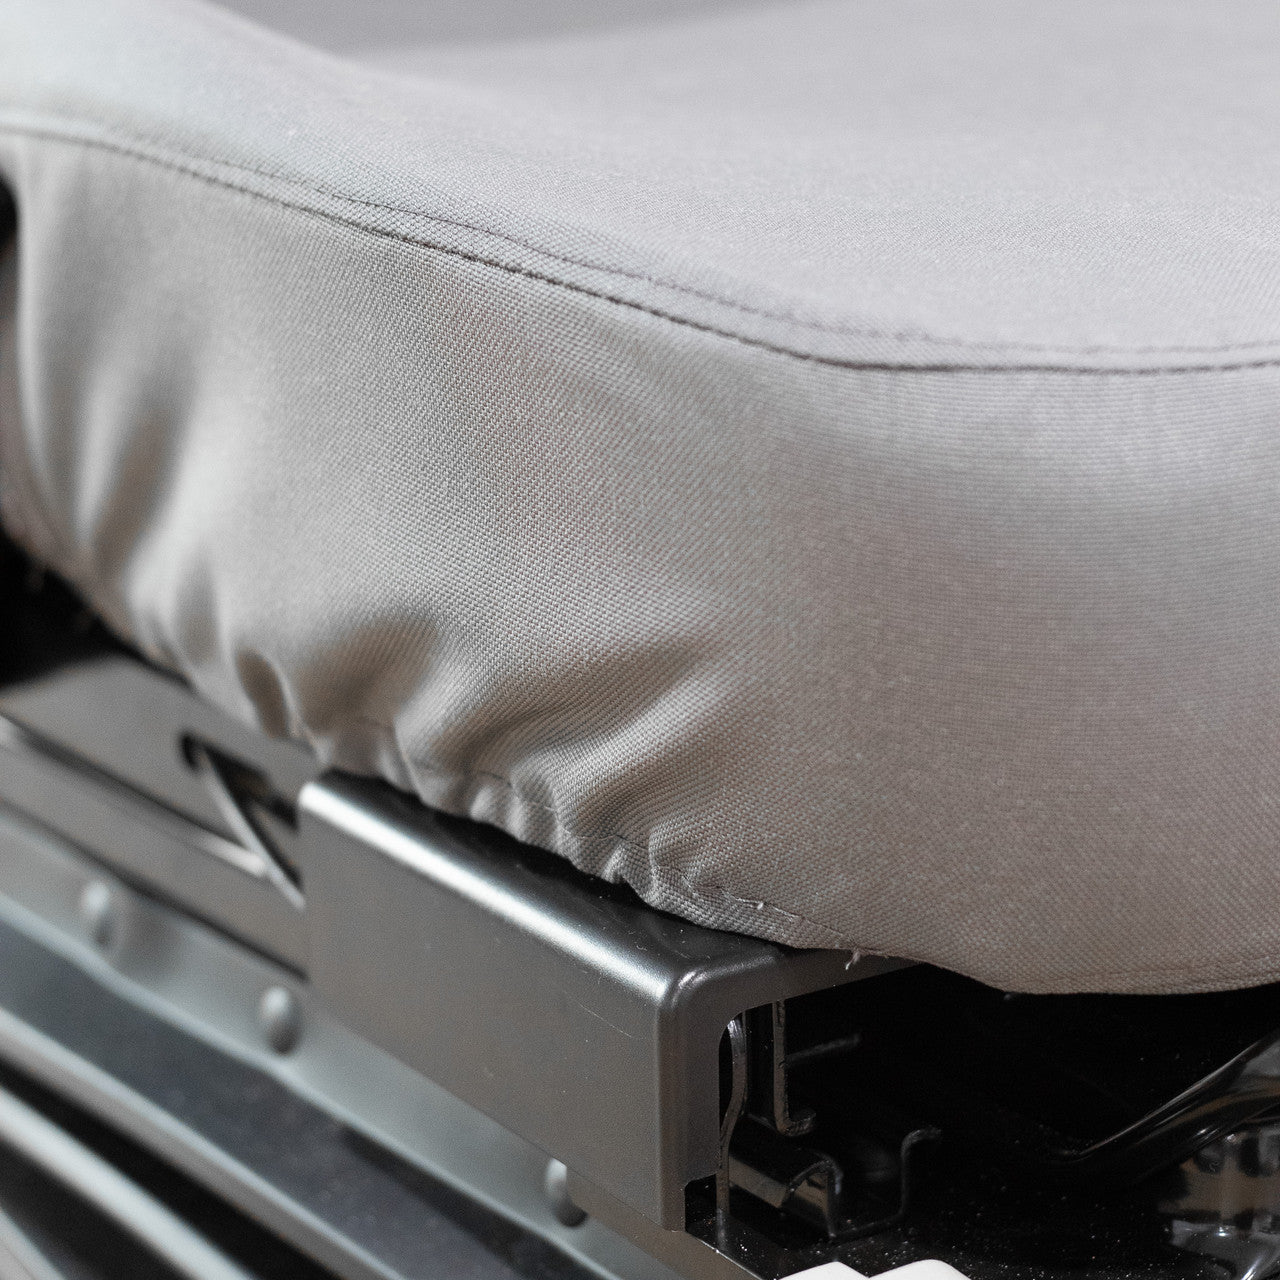 Great fitting heavy duty CASE excavator seat cover